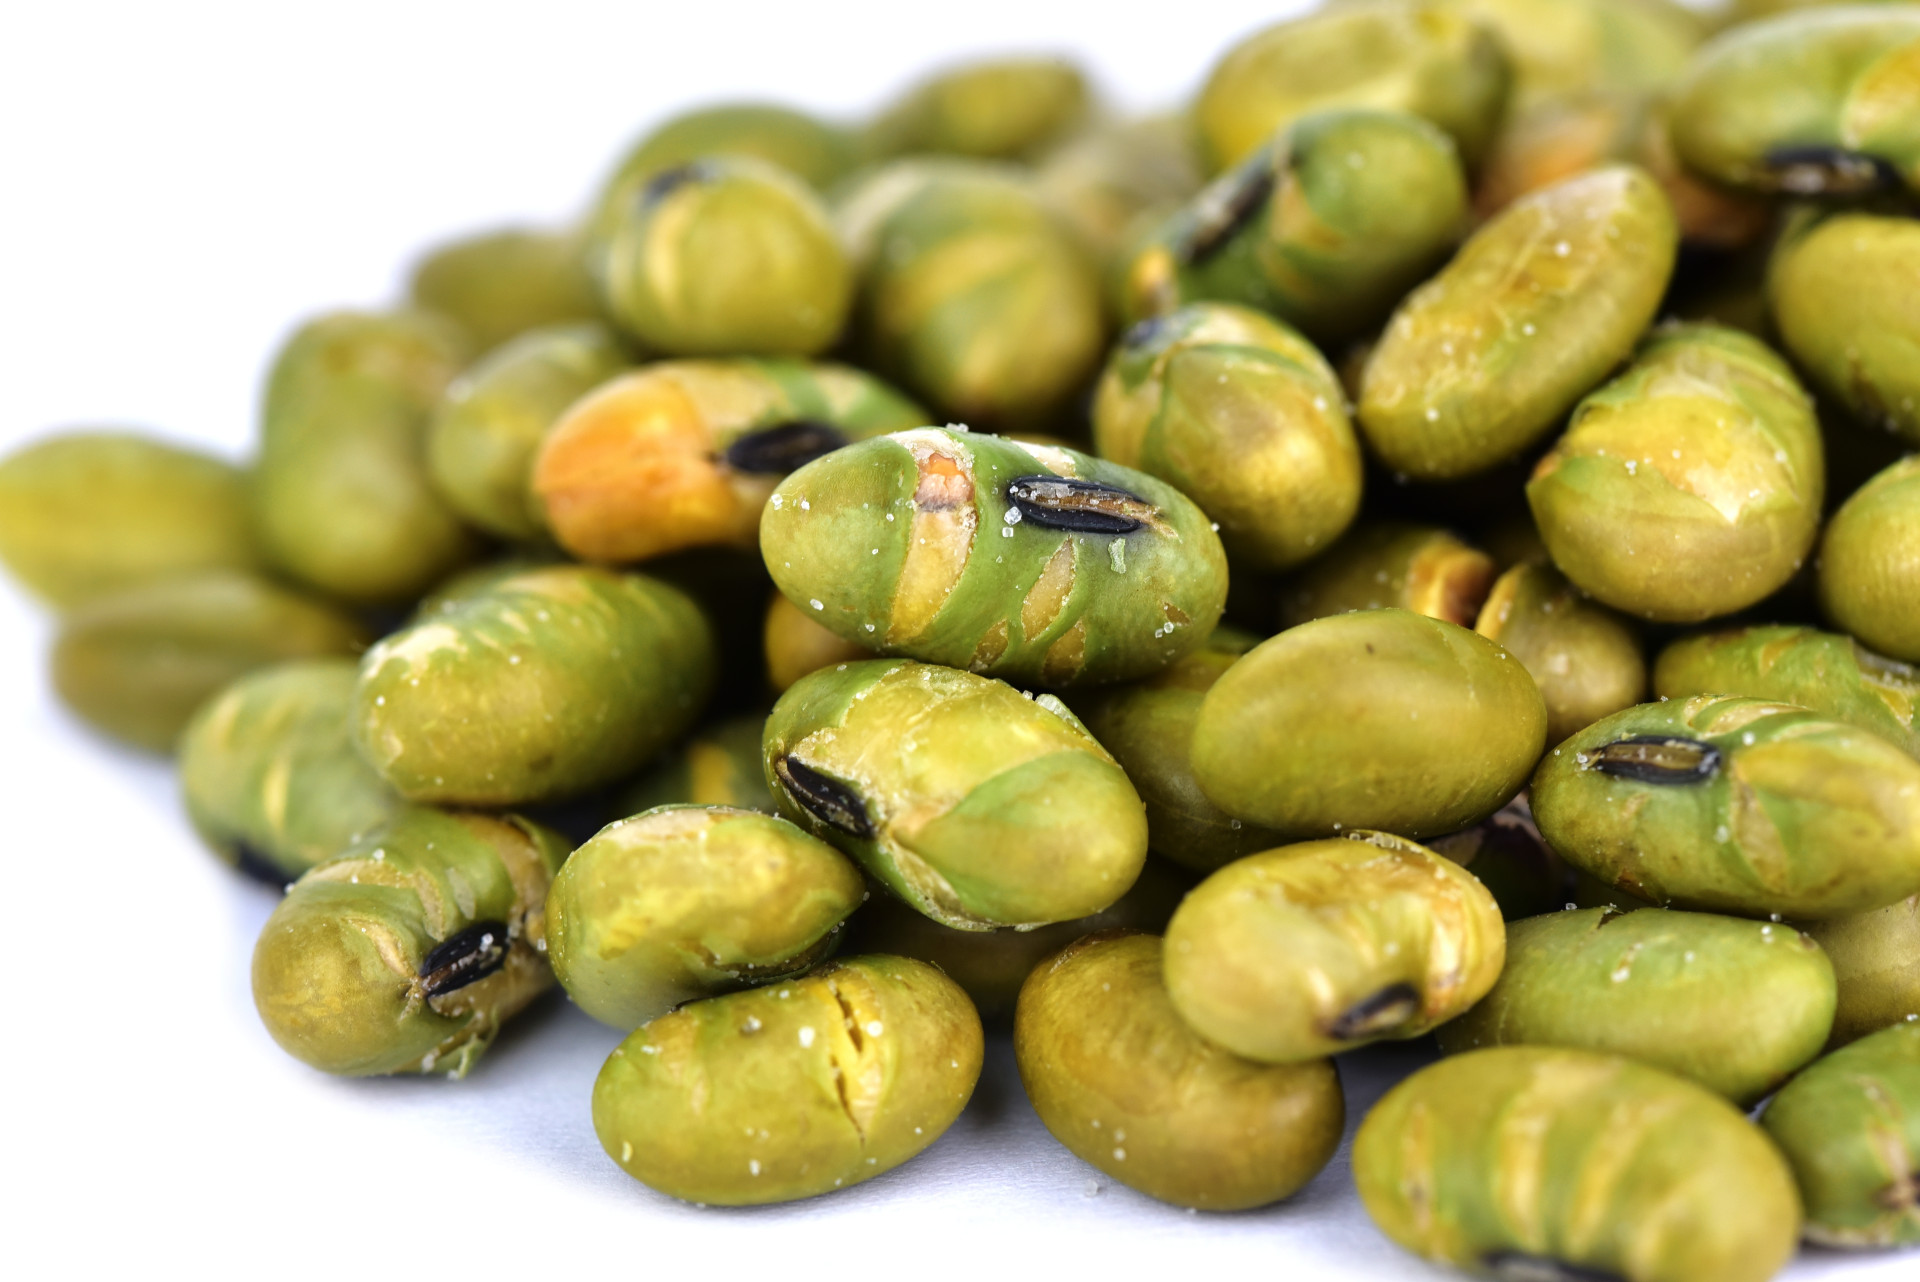 A light-weight snack pulling heavy weight, dry-roasted edamame reportedly offers 14 grams of protein and 8 grams of fiber per serving.<p>You may also like:<a href="https://www.starsinsider.com/n/445209?utm_source=msn.com&utm_medium=display&utm_campaign=referral_description&utm_content=356024v3en-us"> Vintage wedding photos of celebs from yesteryear</a></p>